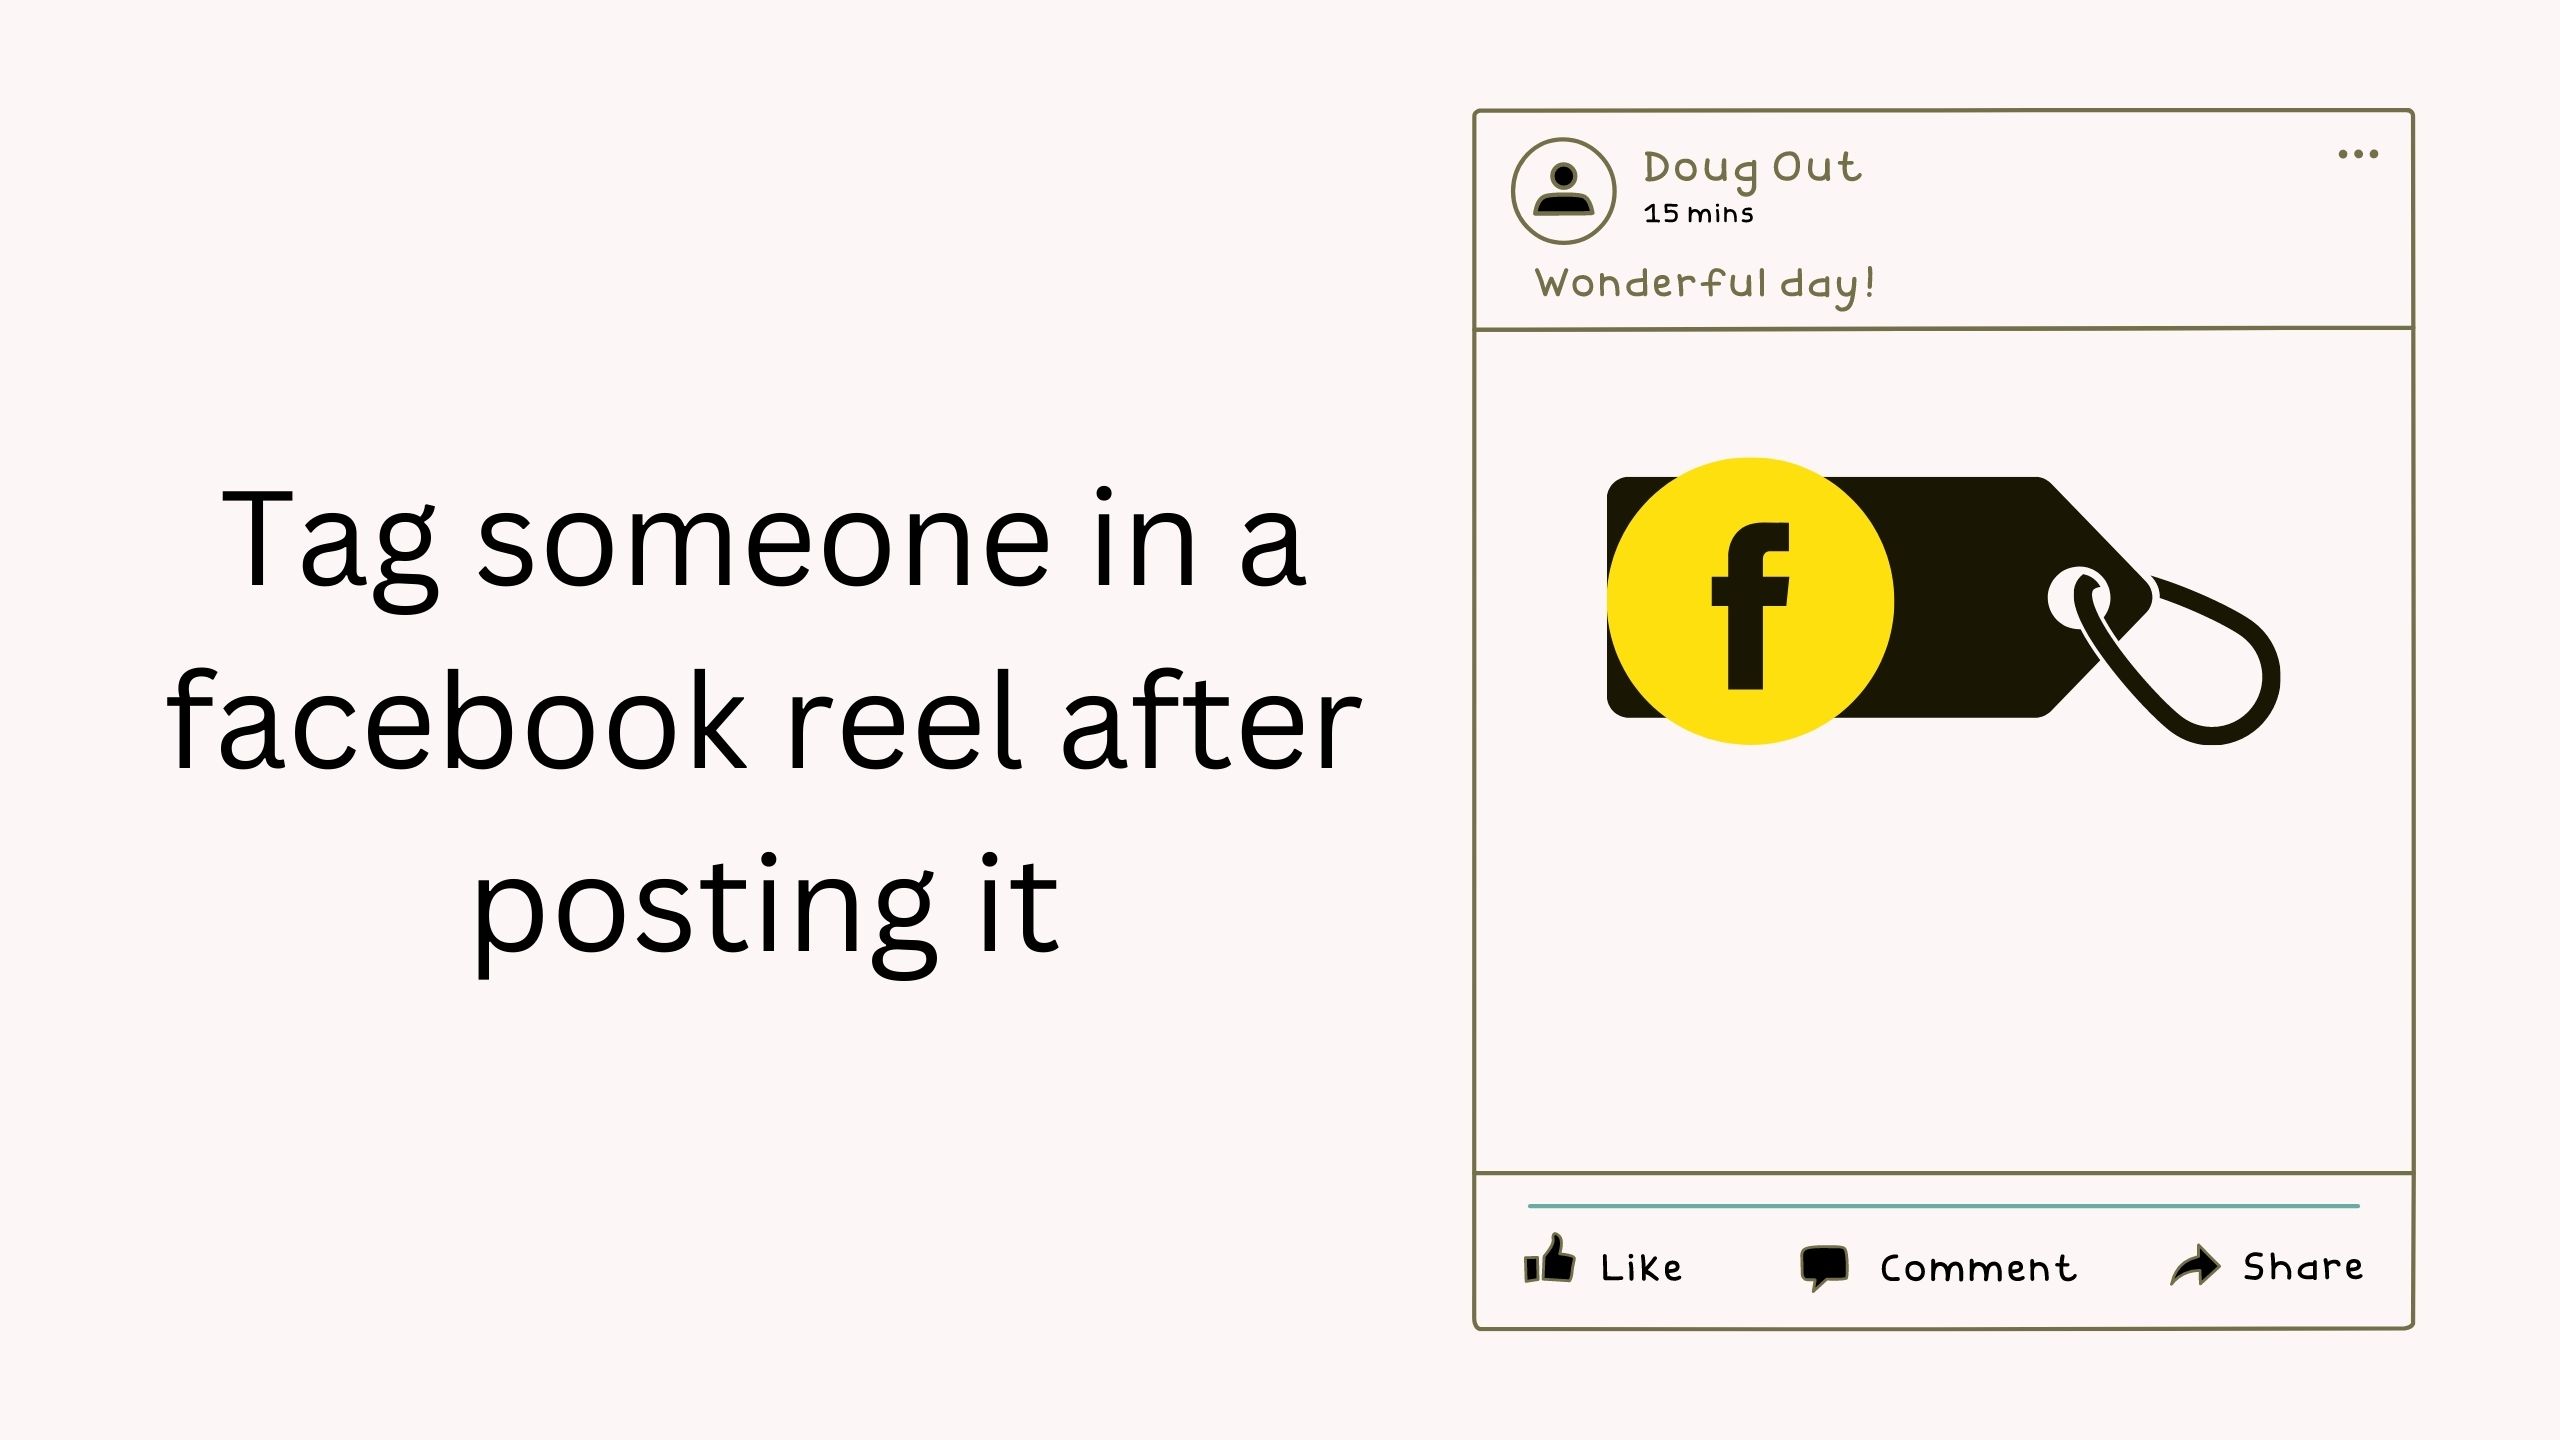 How to tag someone in a Facebook reel after posting?